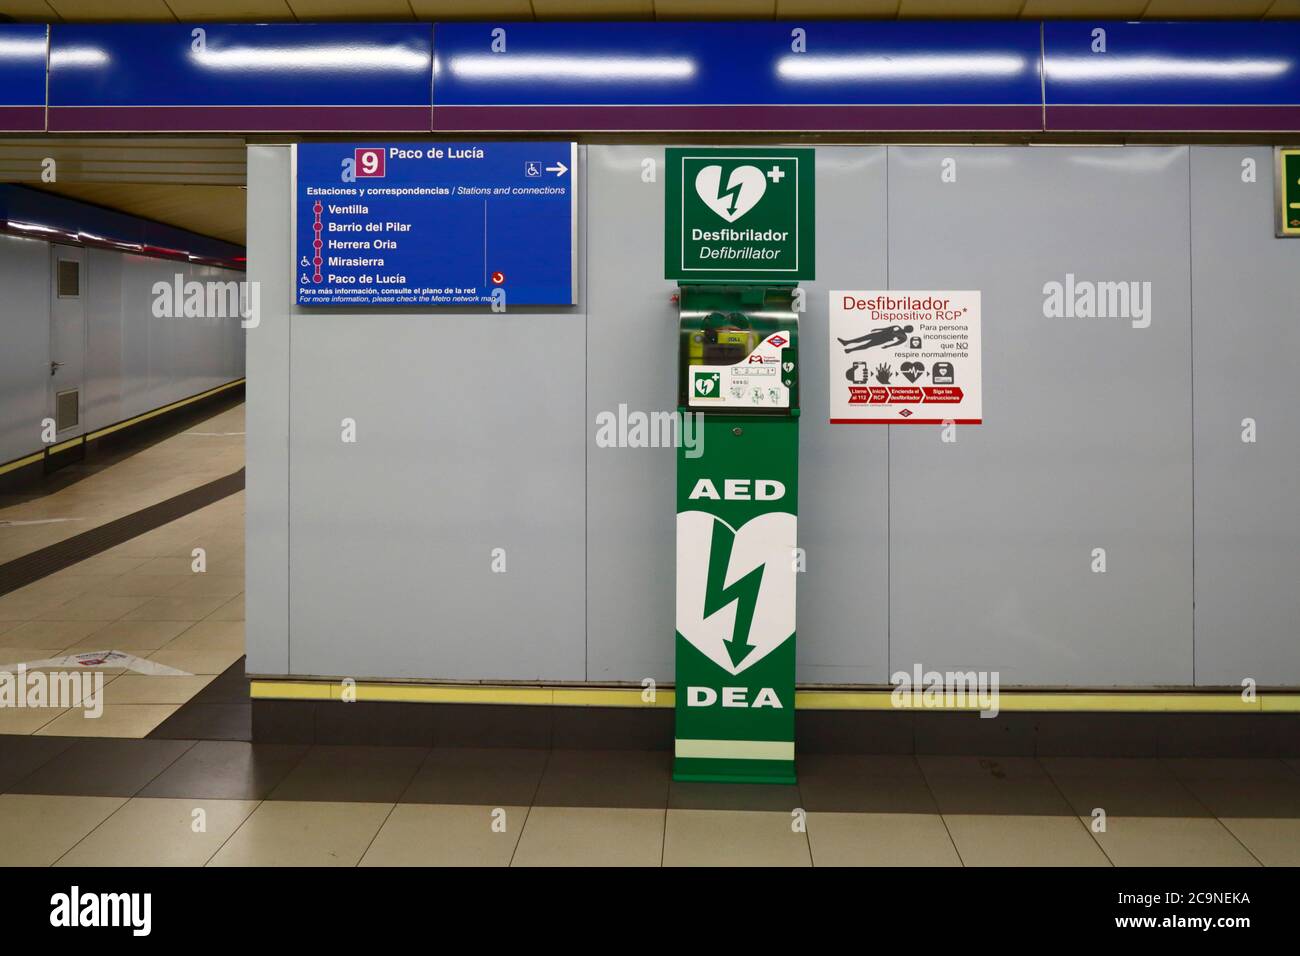 Defibrilator and first aid equipment at emergency station in Paco de Lucia Line 9 metro station, Madrid, Spain Stock Photo